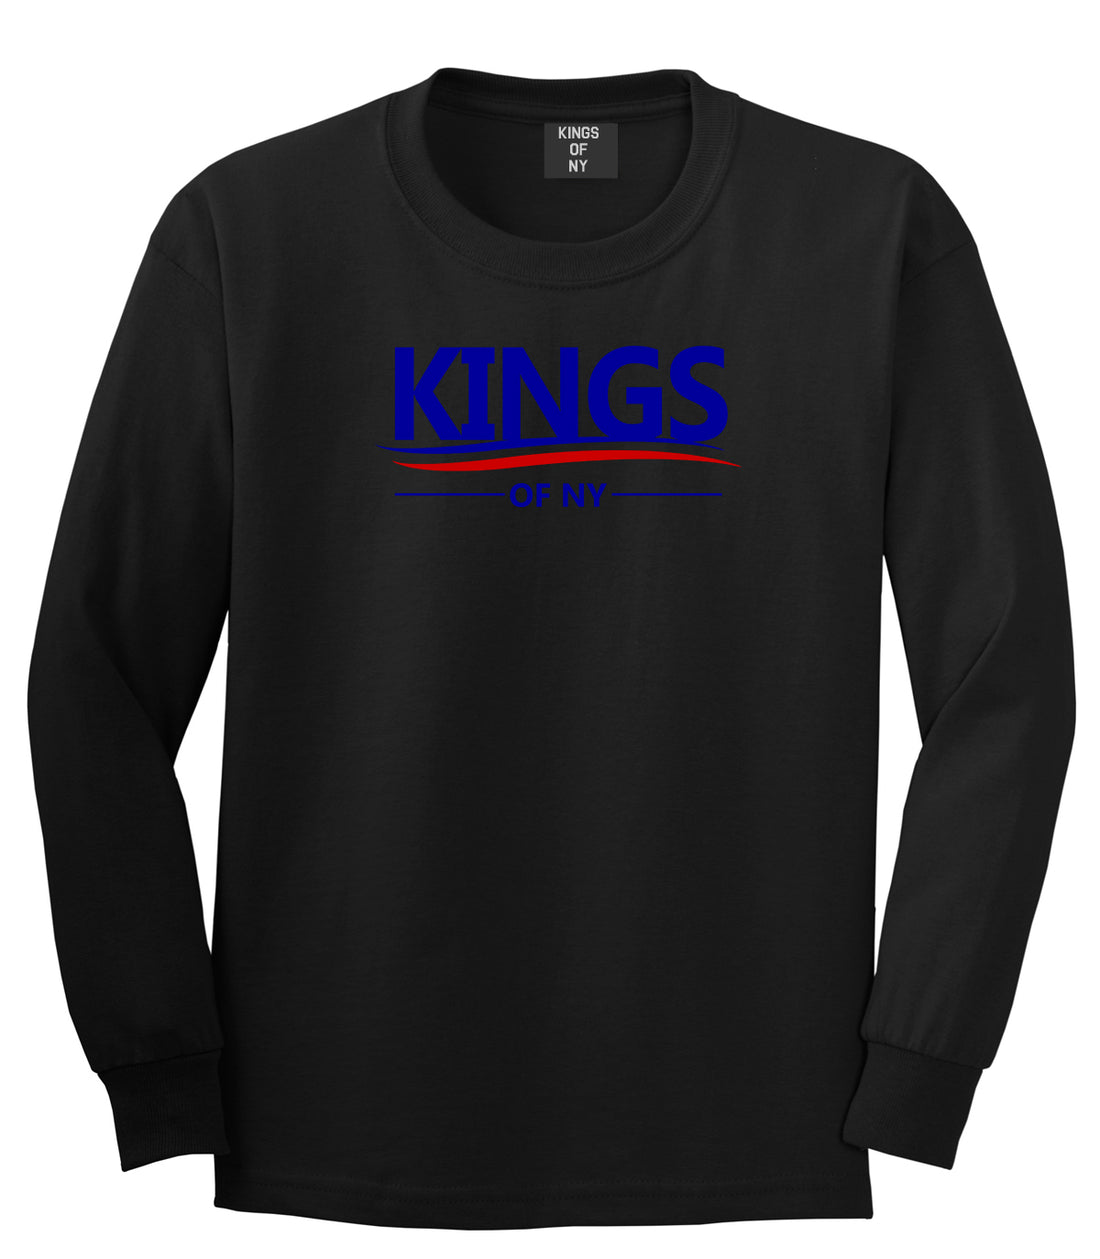 Kings Of NY Campaign Logo Long Sleeve T-Shirt in Black